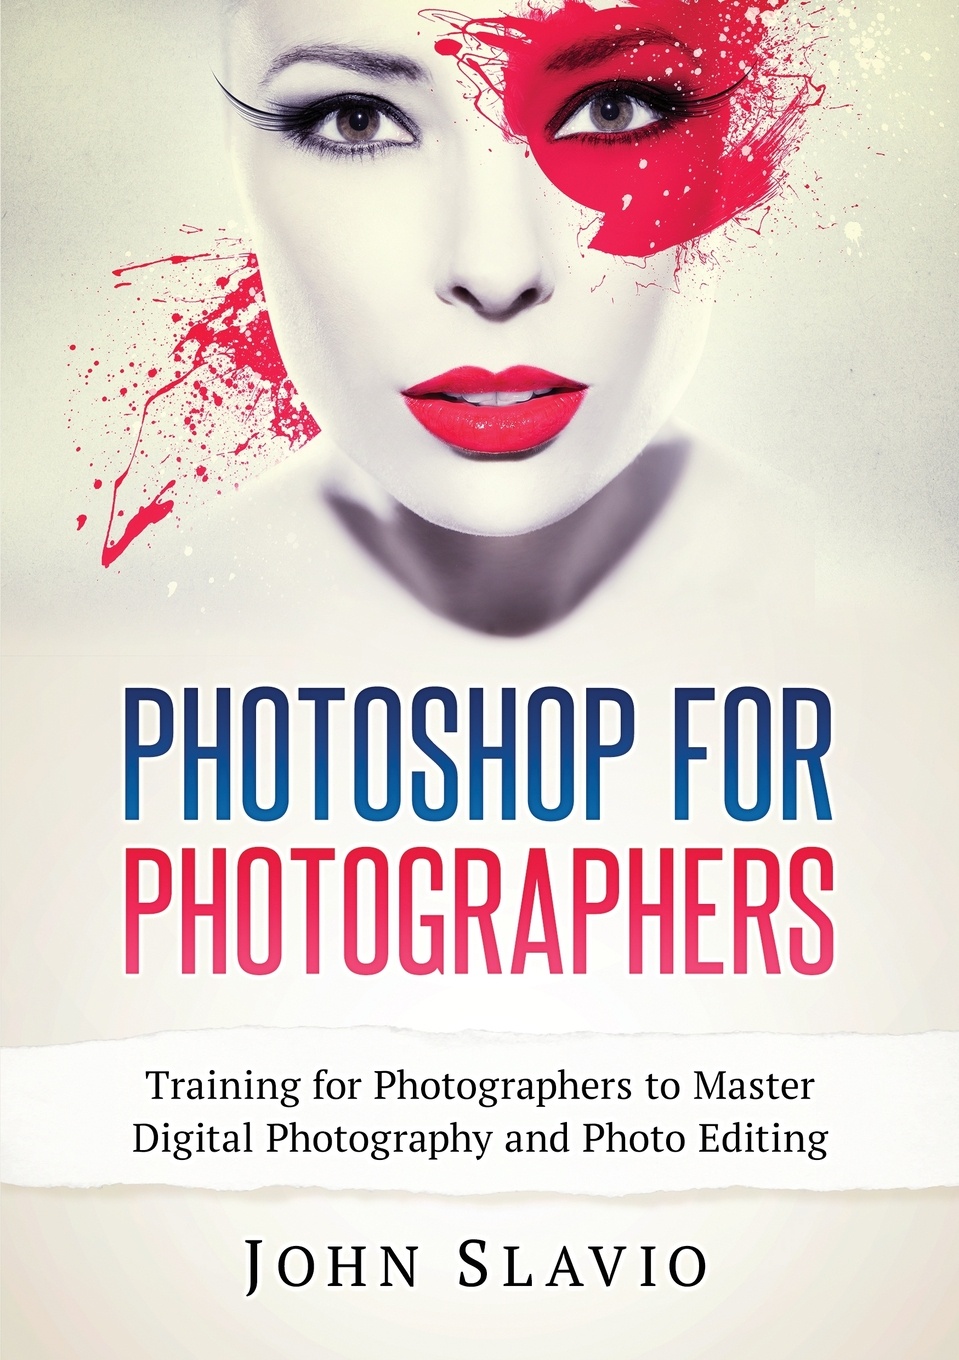 Photoshop for Photographers. Training for Photographers to Master Digital Photography and Photo Editing